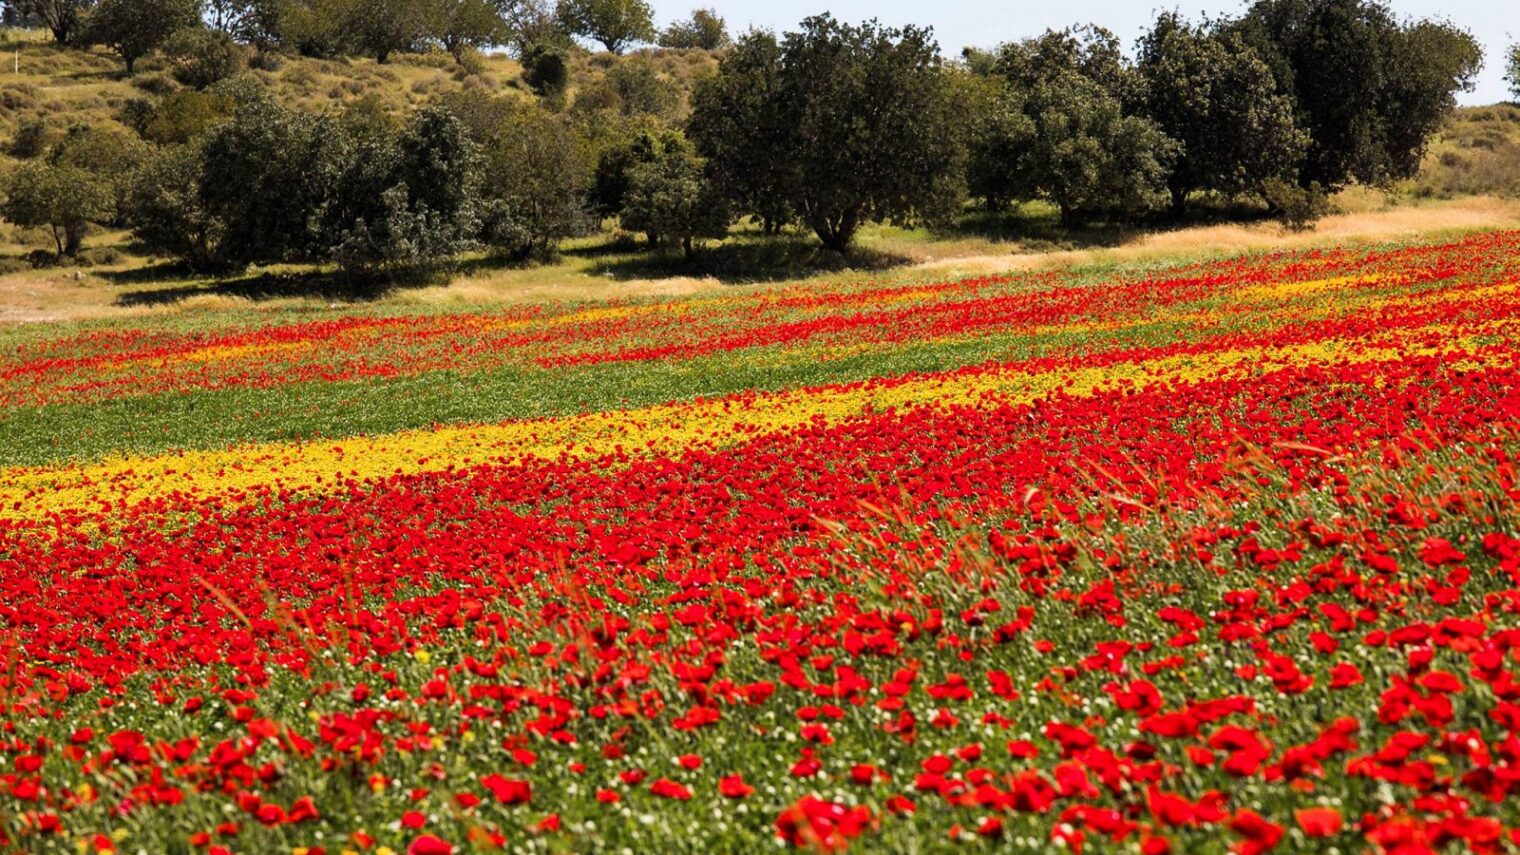 And the colors in the spring are unforgettable. Fields of blooming flowers near Bet Shemesh. Photo by Yaakov Lederman/FLASH90